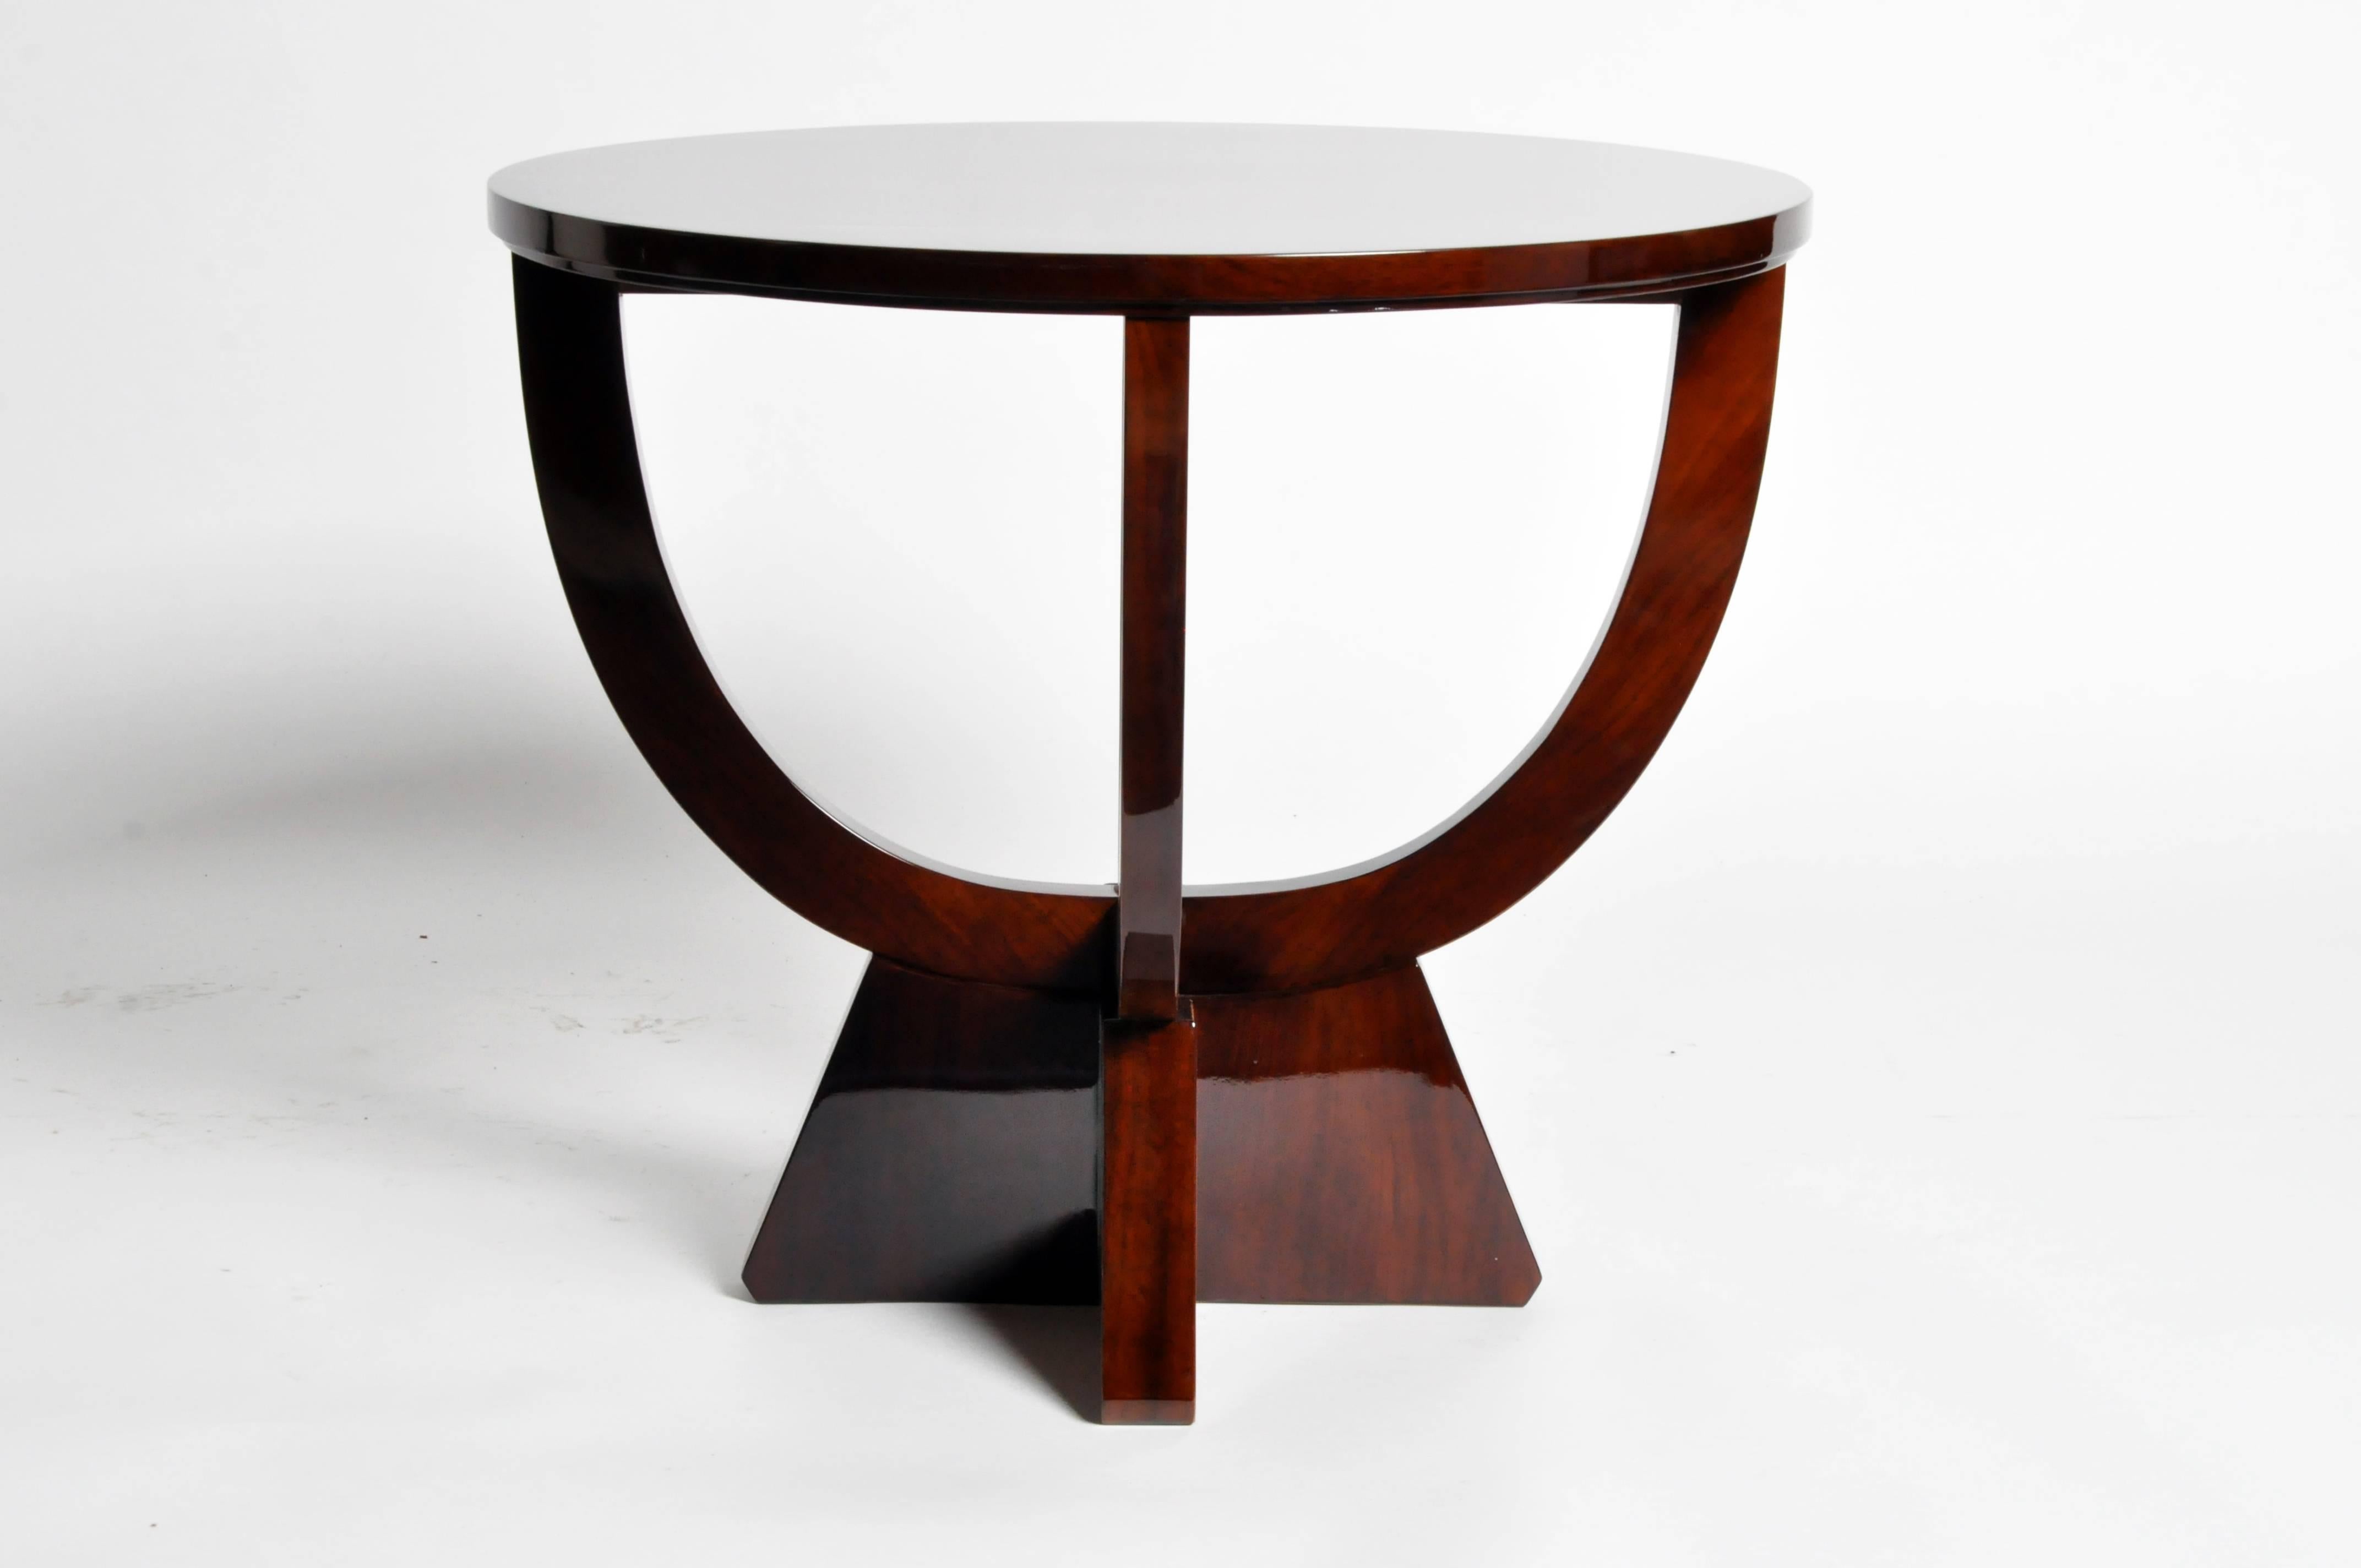 Contemporary Round Table with Walnut Veneer